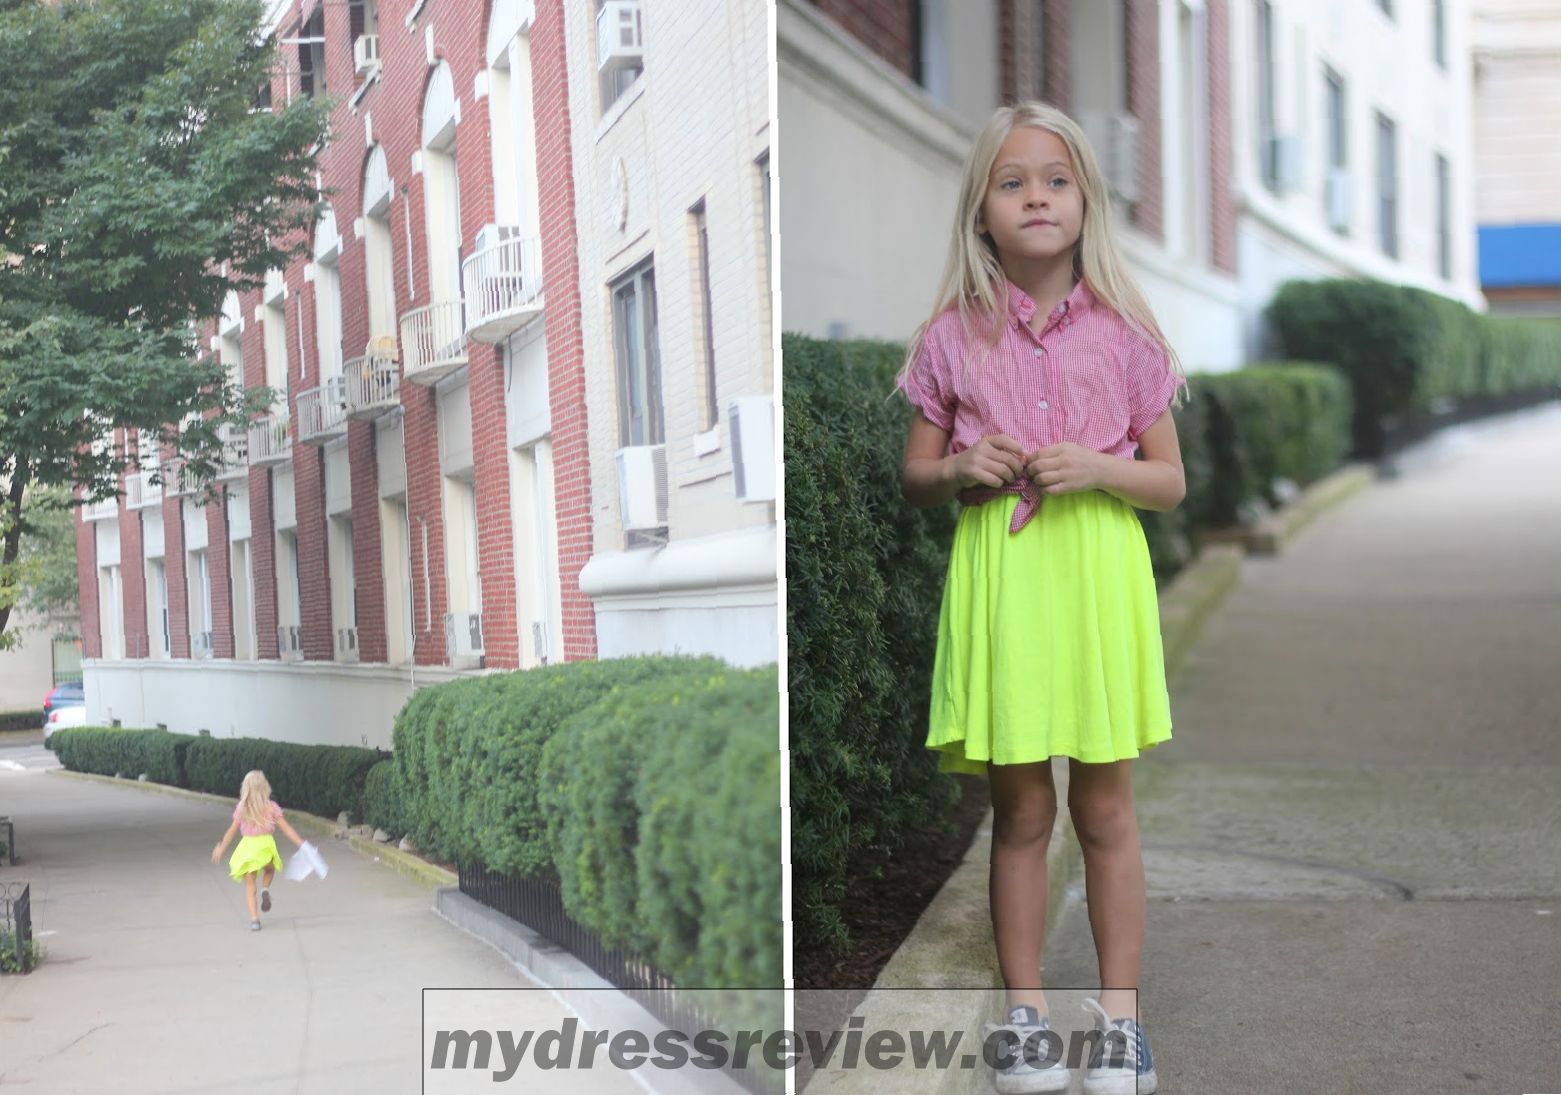 Girl Forcing Boy To Wear Dress & Fashion Outlet Review